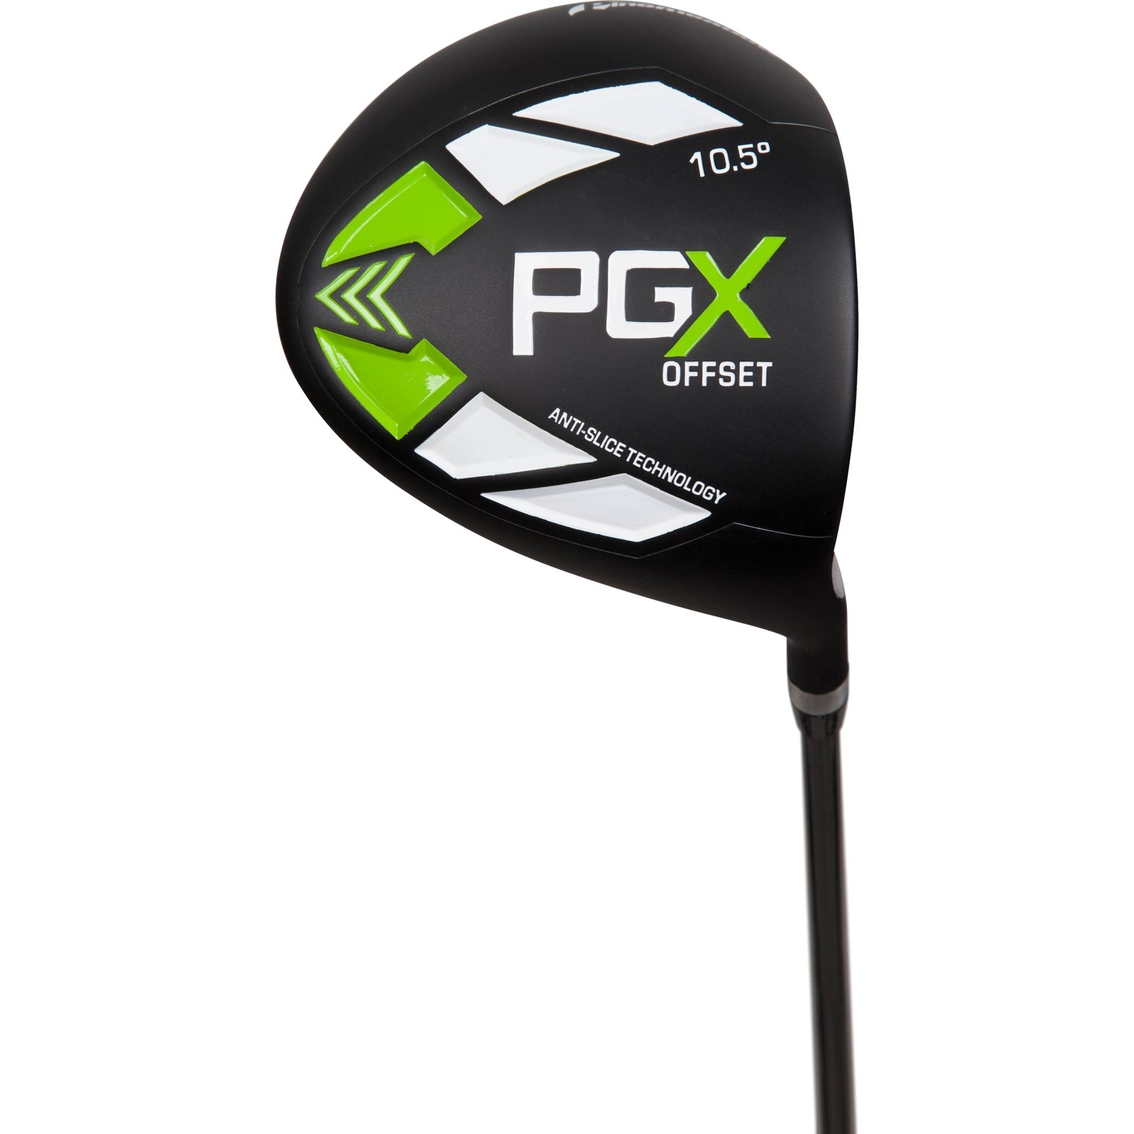 Pinemeadow Golf PGX 460cc Offset Driver - Image 3 of 4